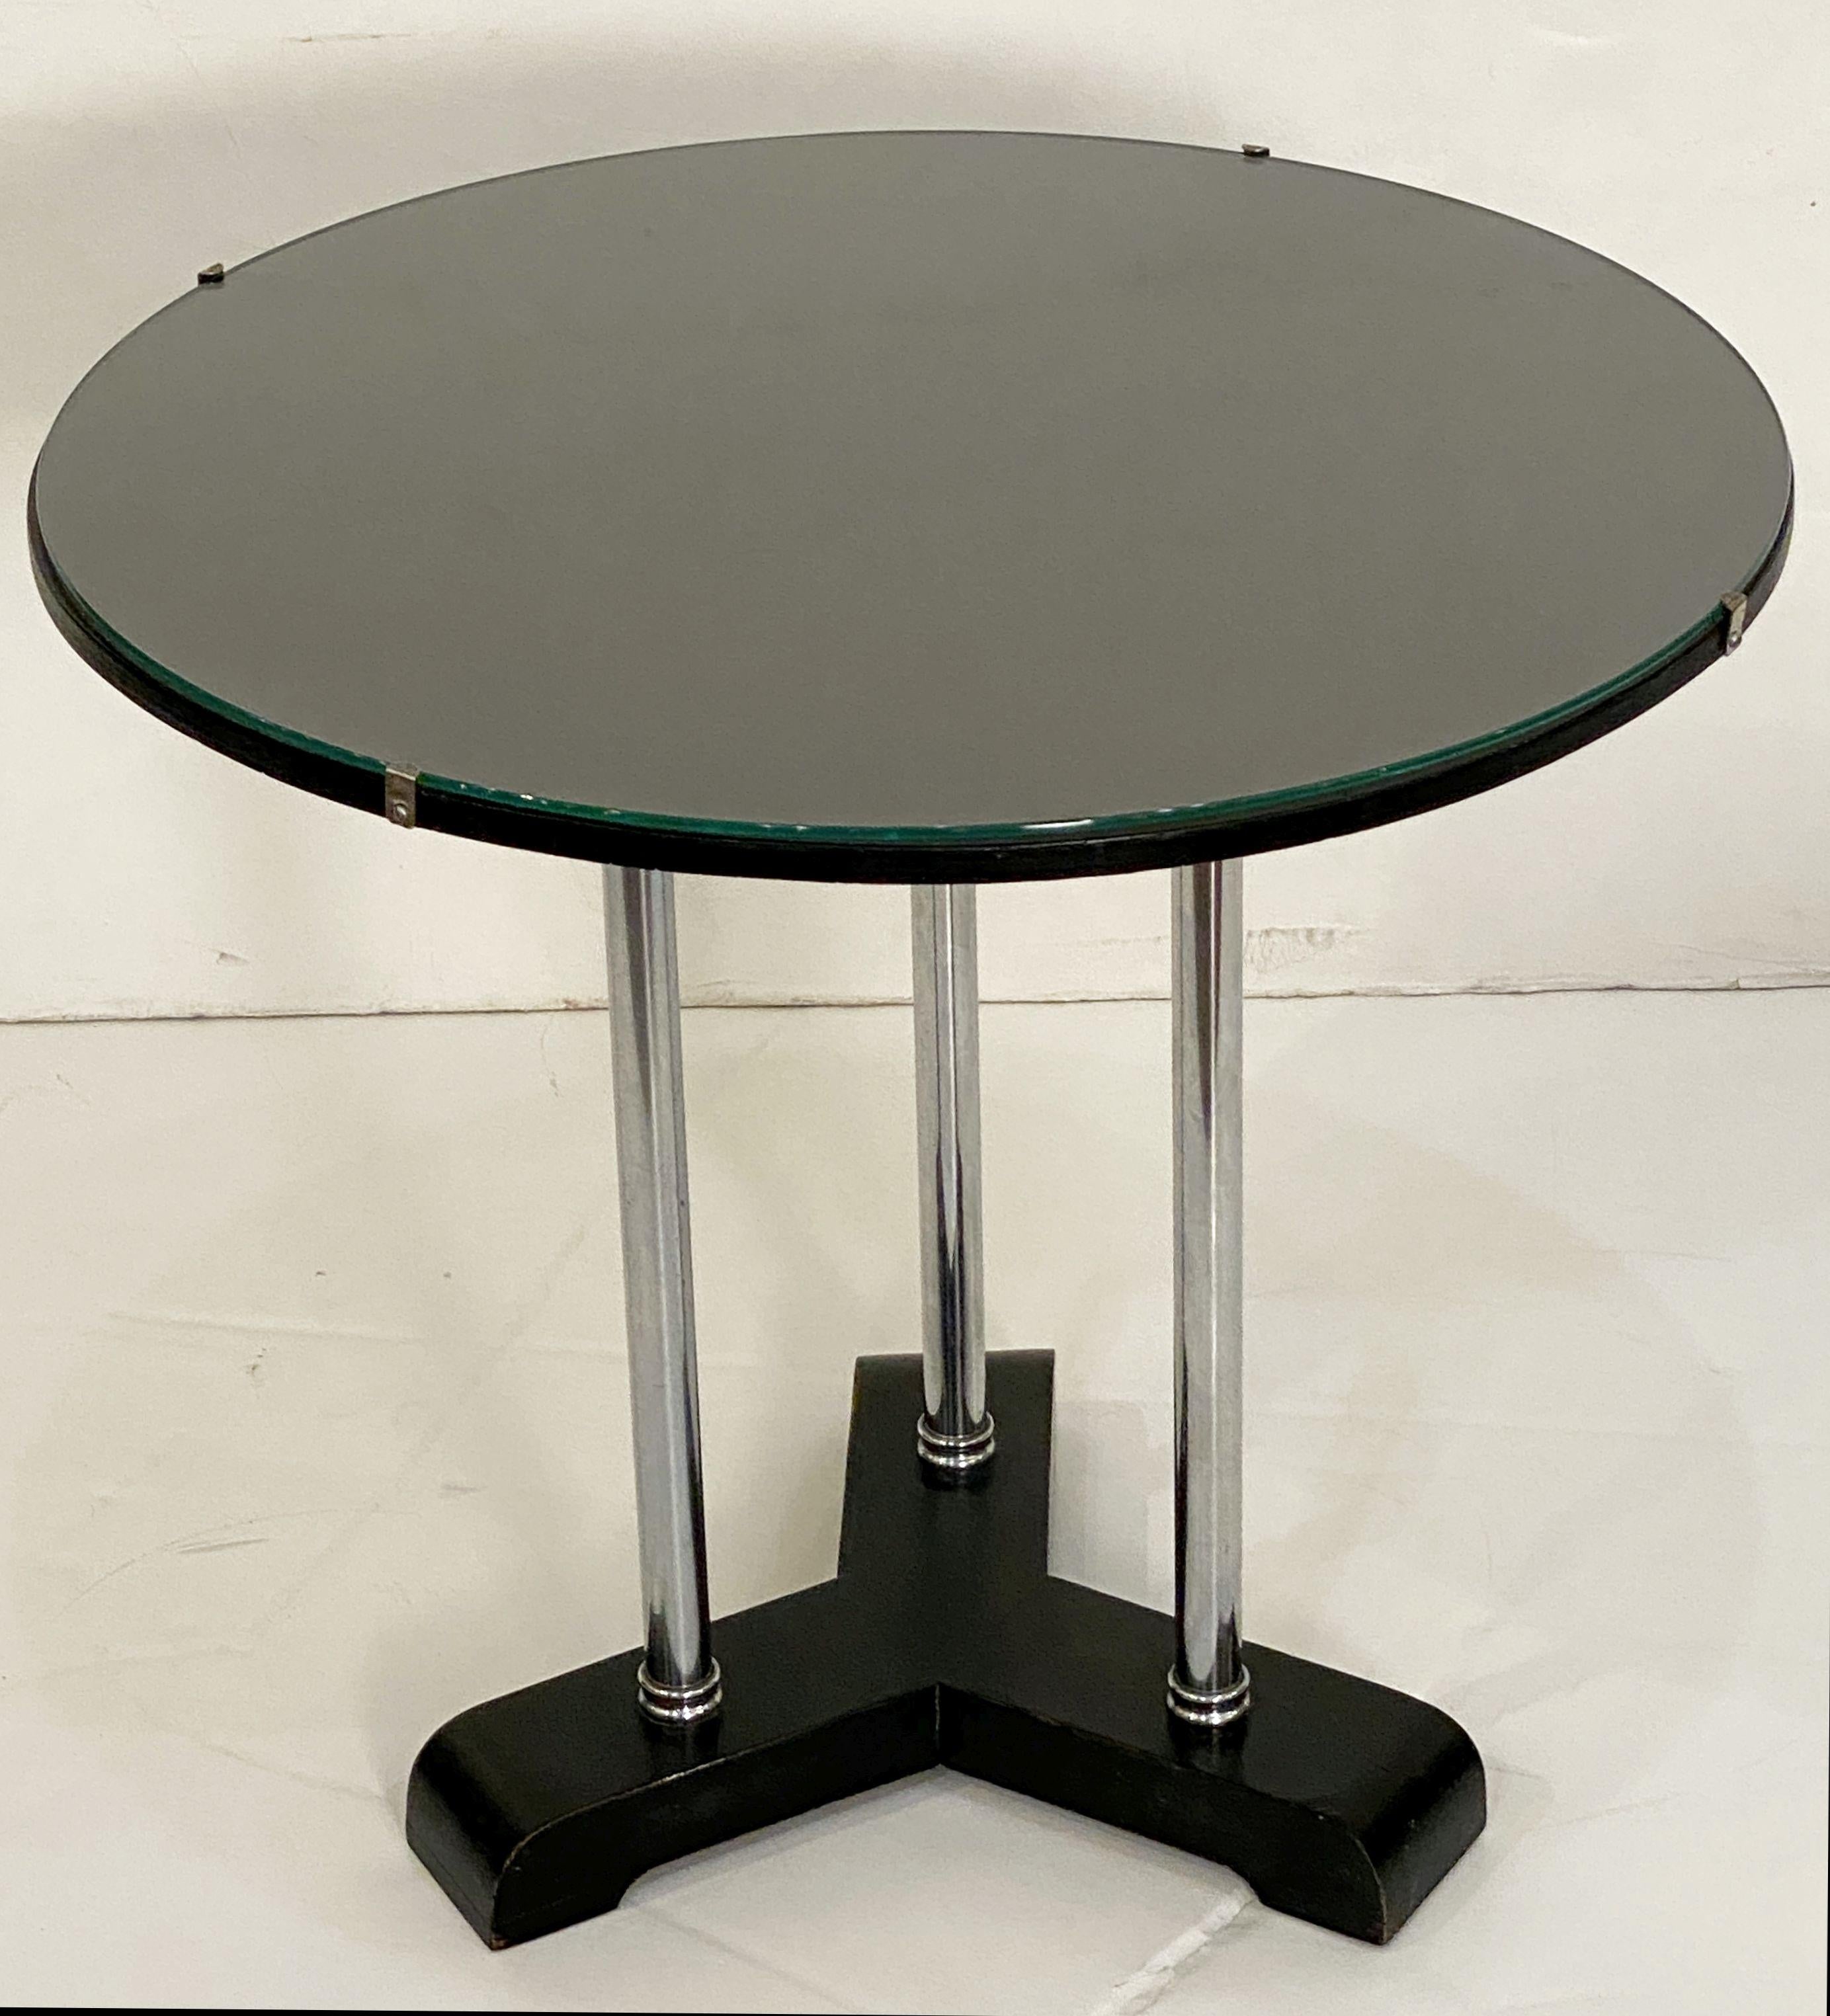 English Art Deco Round Drinks Tripod Table of Chrome, Ebonized Wood, and Glass For Sale 1